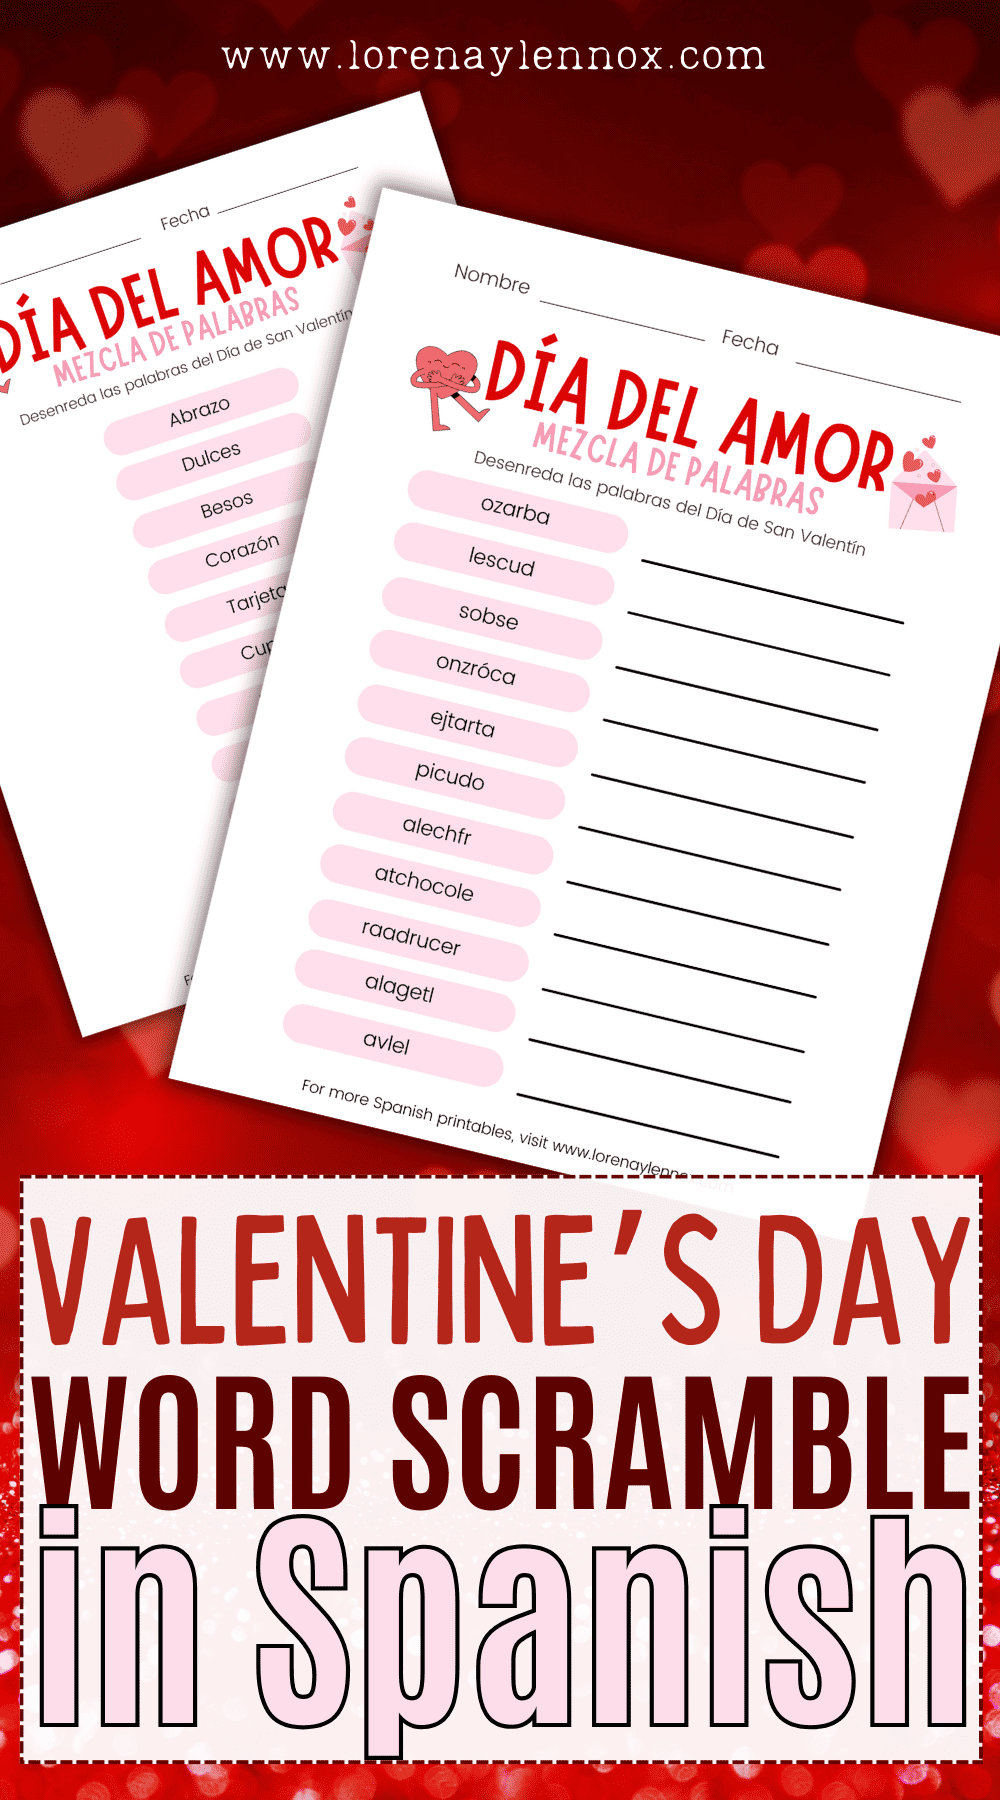 Indulge in some Valentine's Day fun with our Spanish Word Scramble Printable! Unravel love-themed puzzles with your sweetheart or enjoy a playful activity with friends and family. Perfect for adding a touch of romance to your celebrations. Download now and spread the love! #ValentinesDay #Spanish #Printable #LovePuzzles